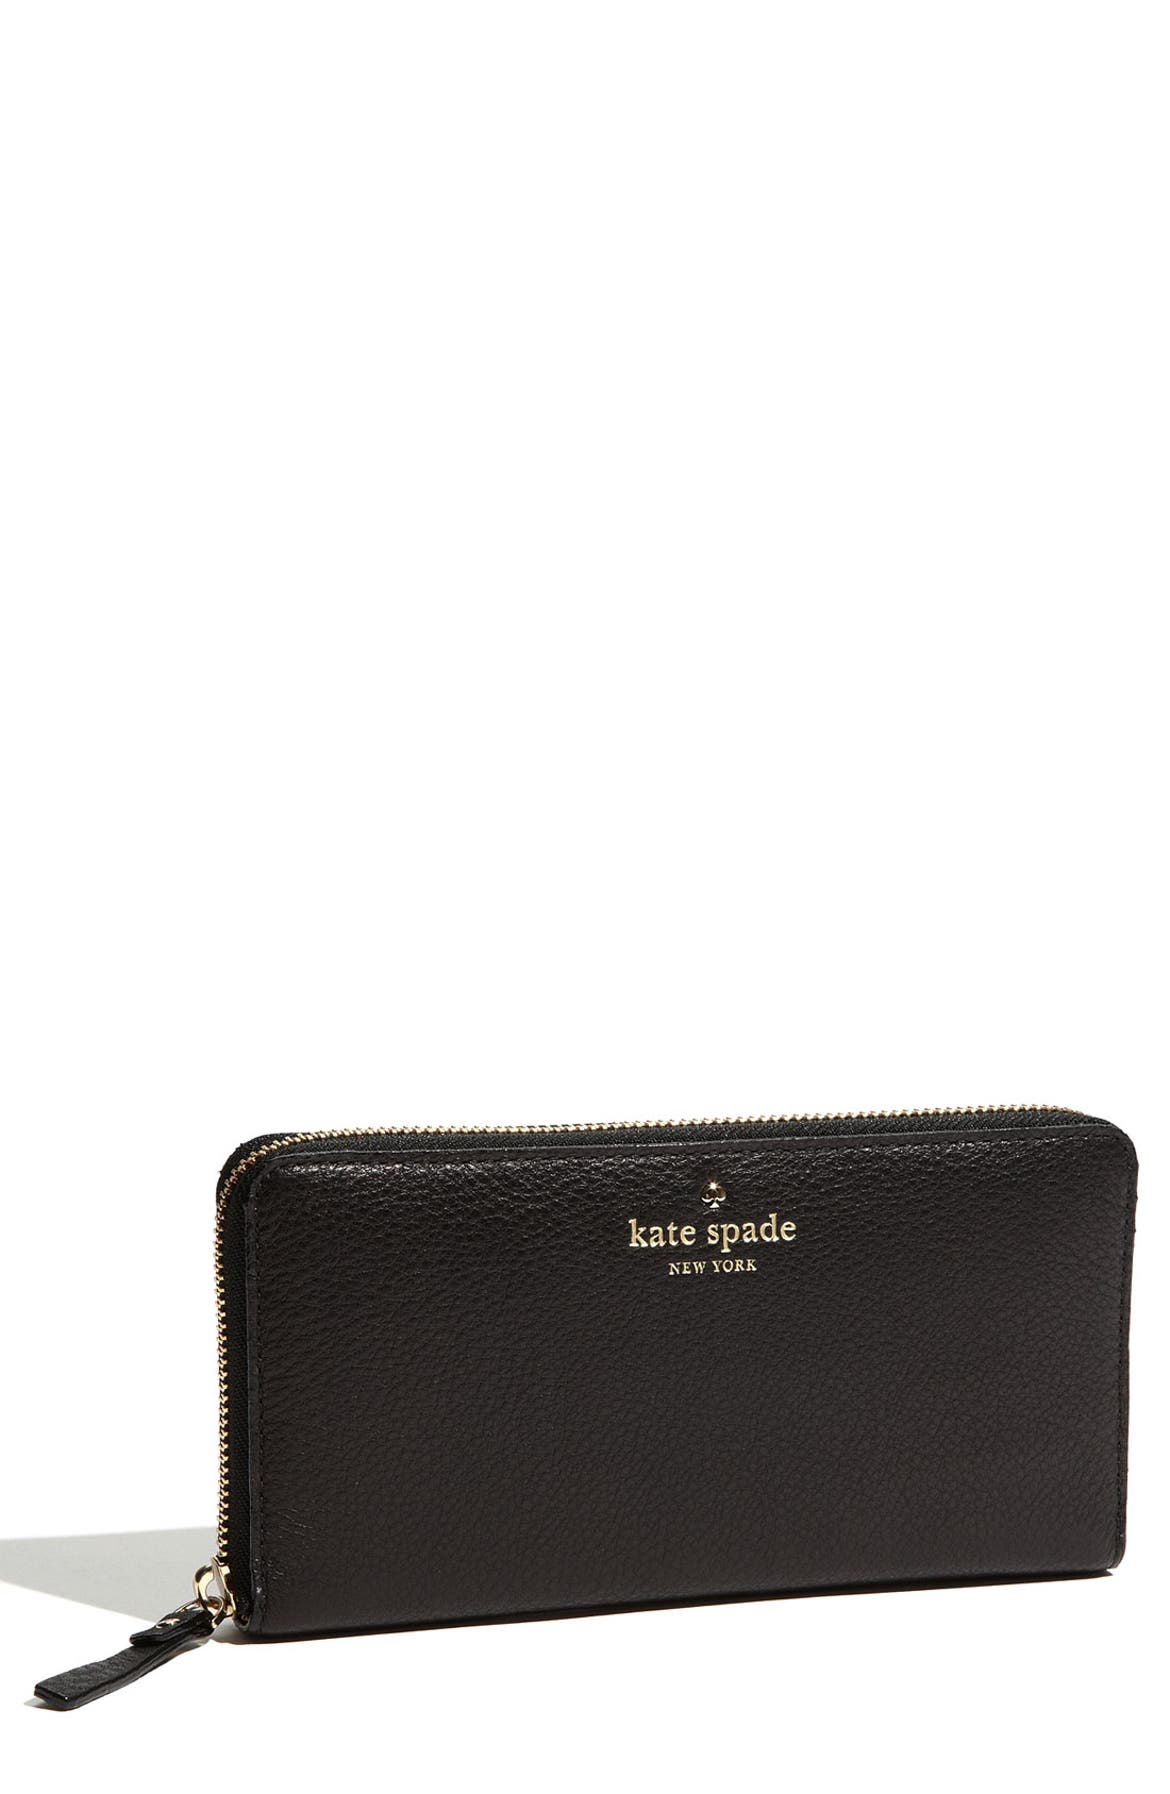 kate spade new york 'cobble hill - lacey' zip around wallet | Nordstrom